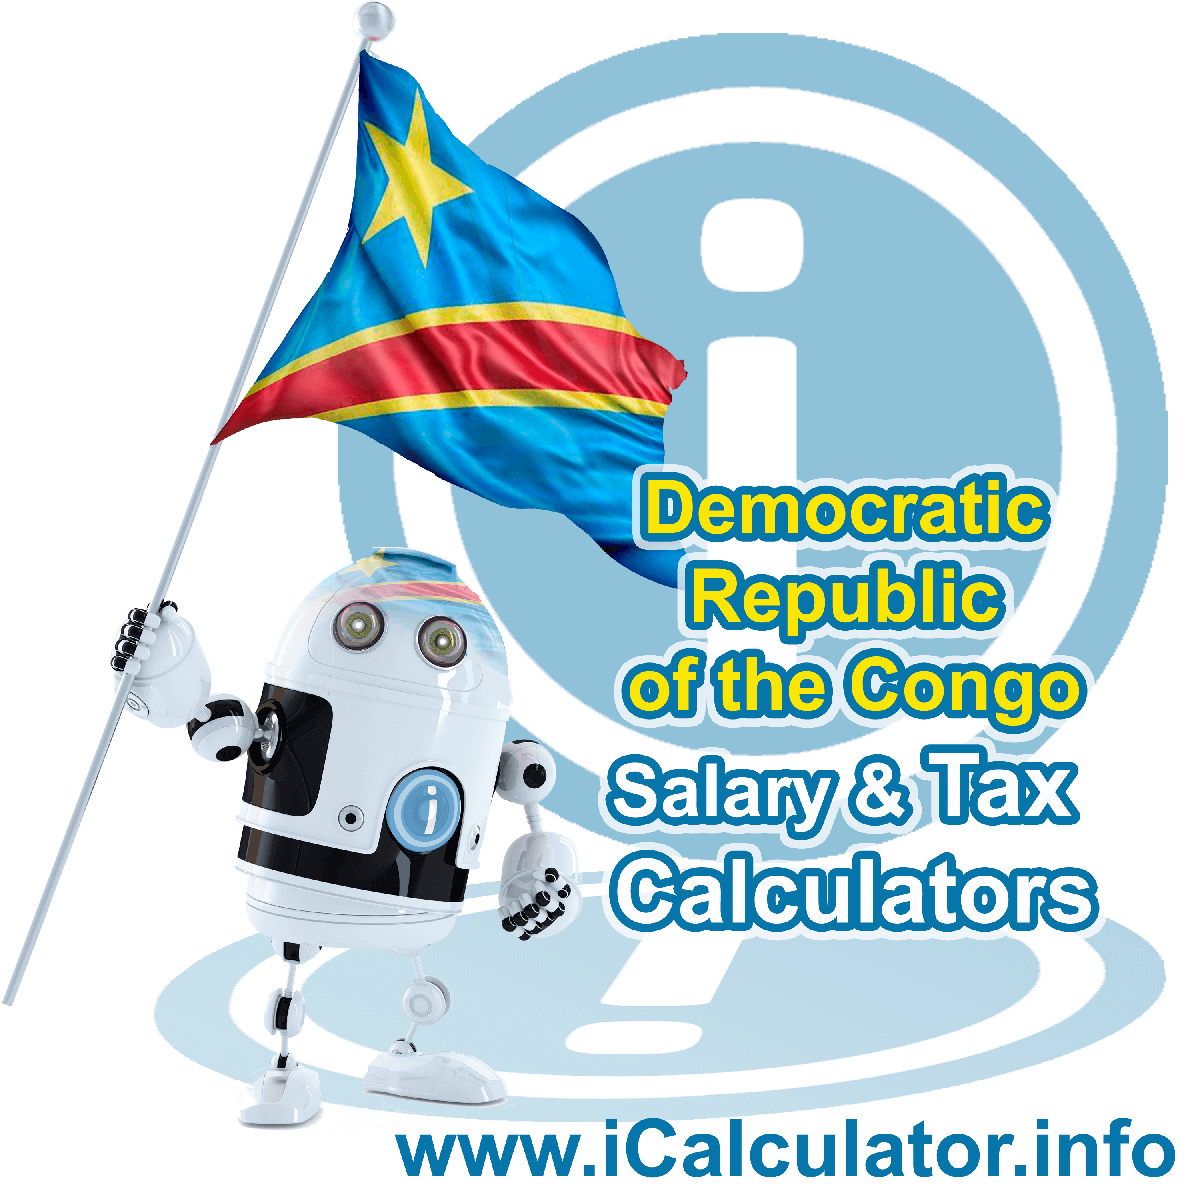 Democratic Republic Of The Congo Tax Calculator. This image shows the Democratic Republic Of The Congo flag and information relating to the tax formula for the Democratic Republic Of The Congo Salary Calculator